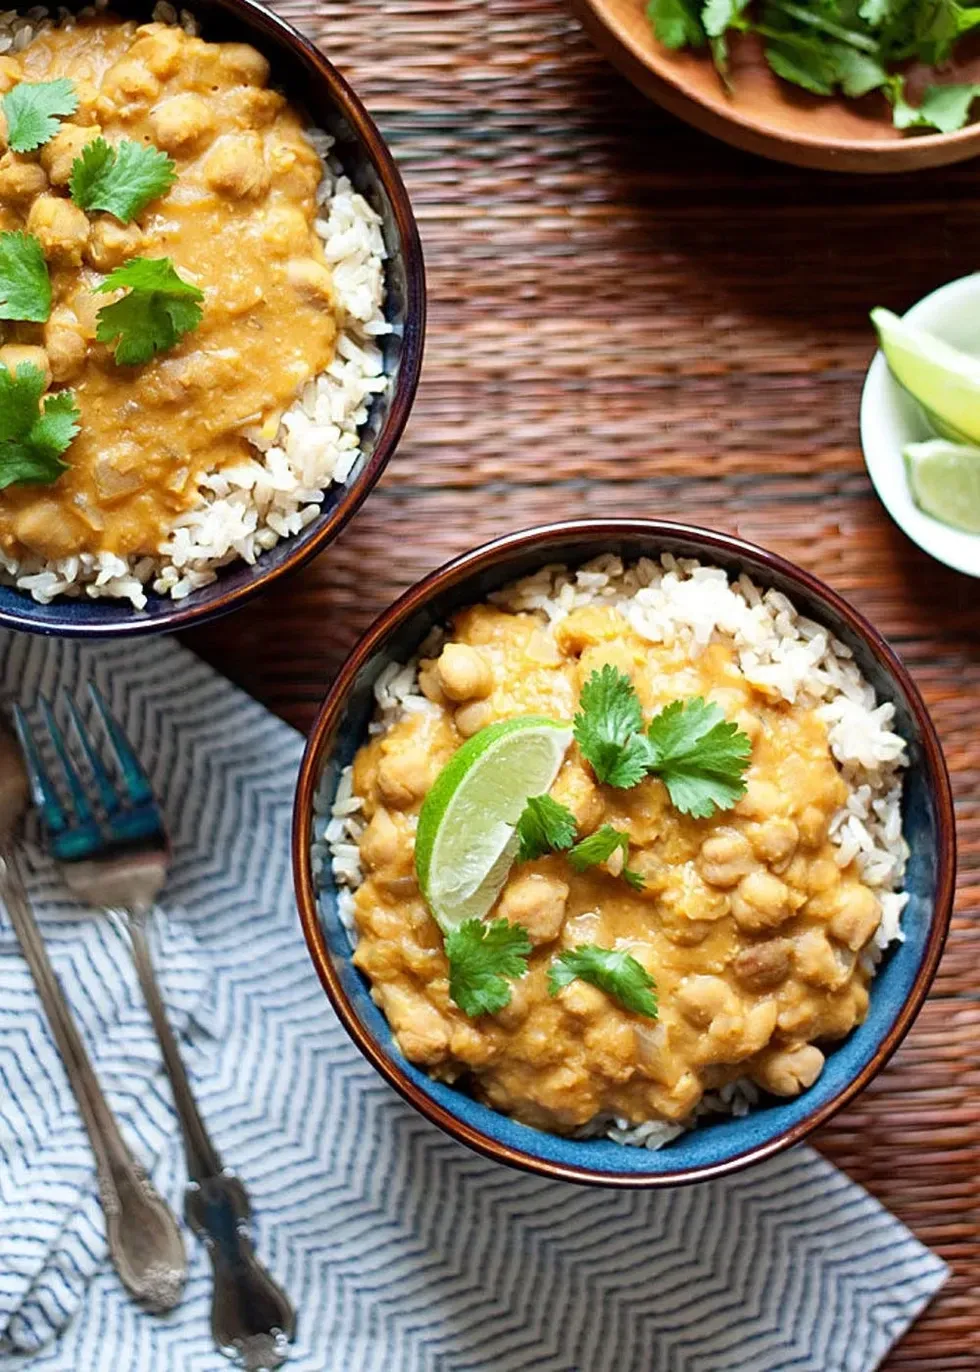 Pumpkin, Chickpea, and Red Lentil Curry